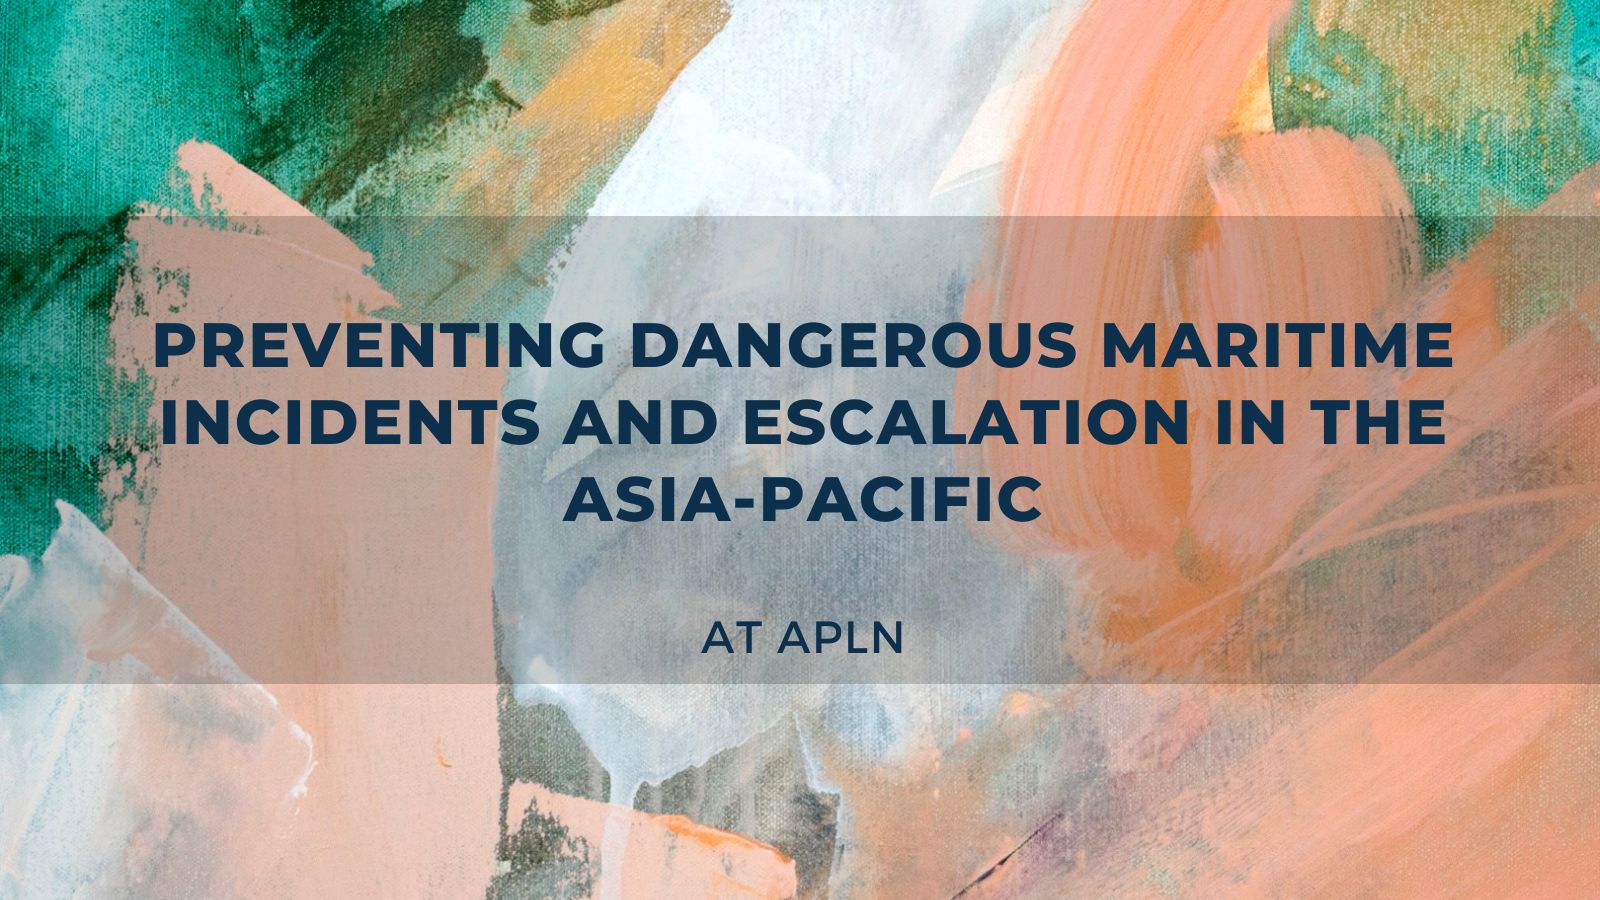 Maritime Incidents and Escalation in the Asia-Pacific